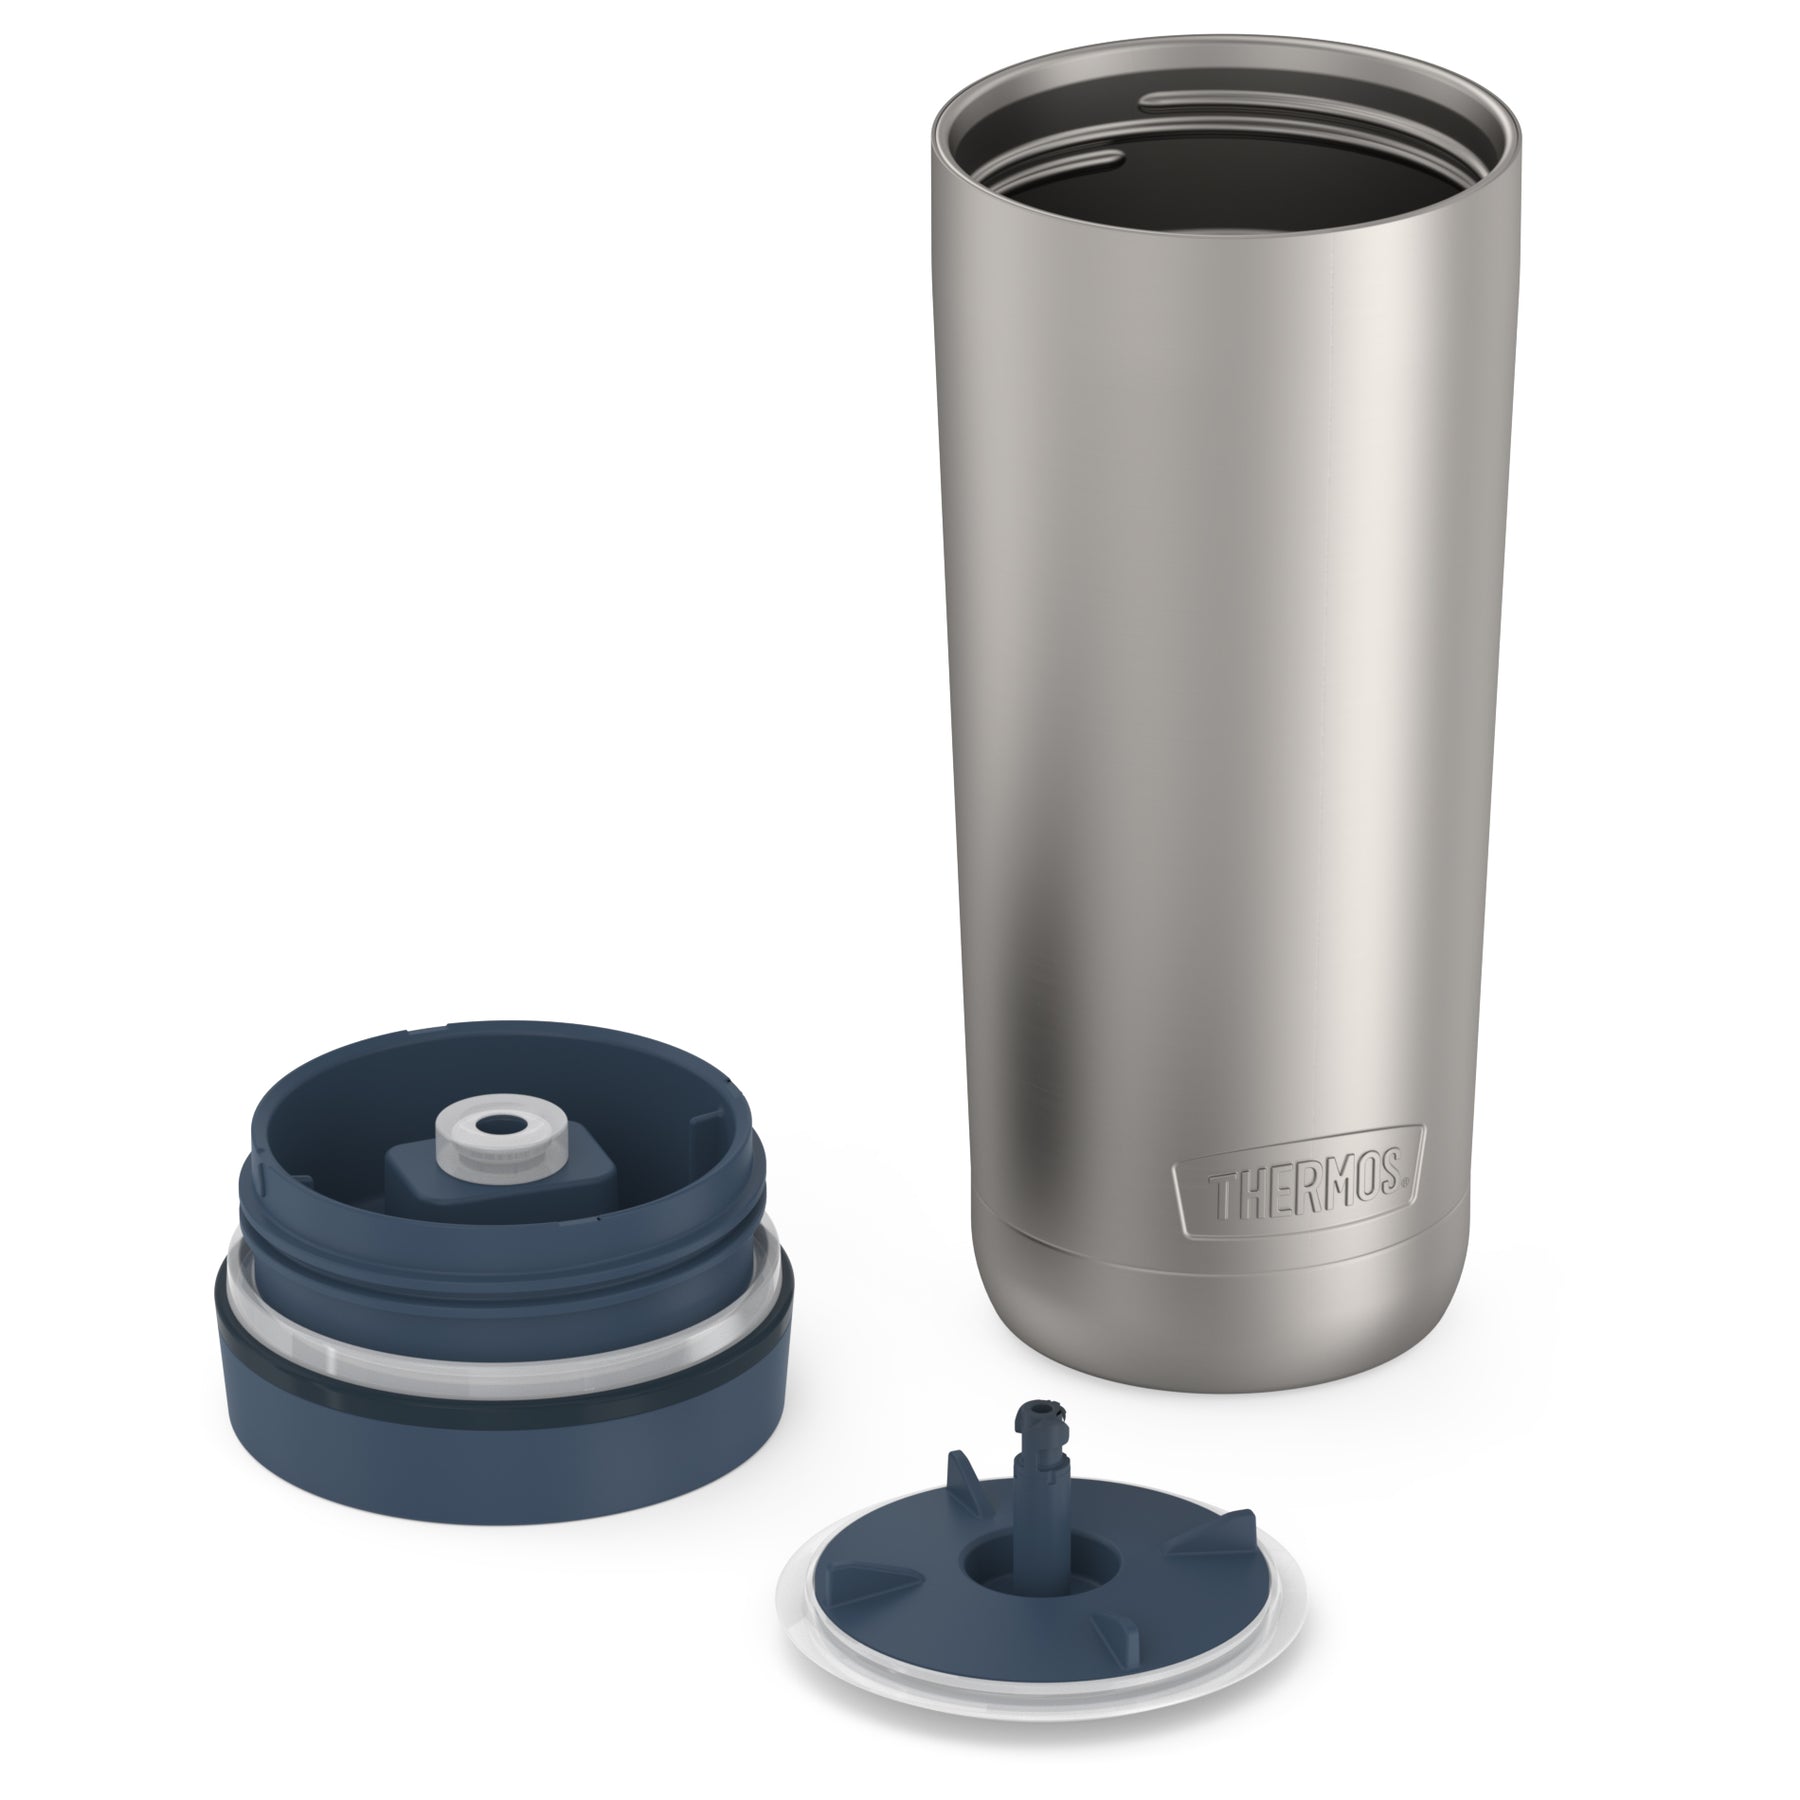 Thermos 18 oz. Slate Blue Stainless Steel Vacuum-Insulated